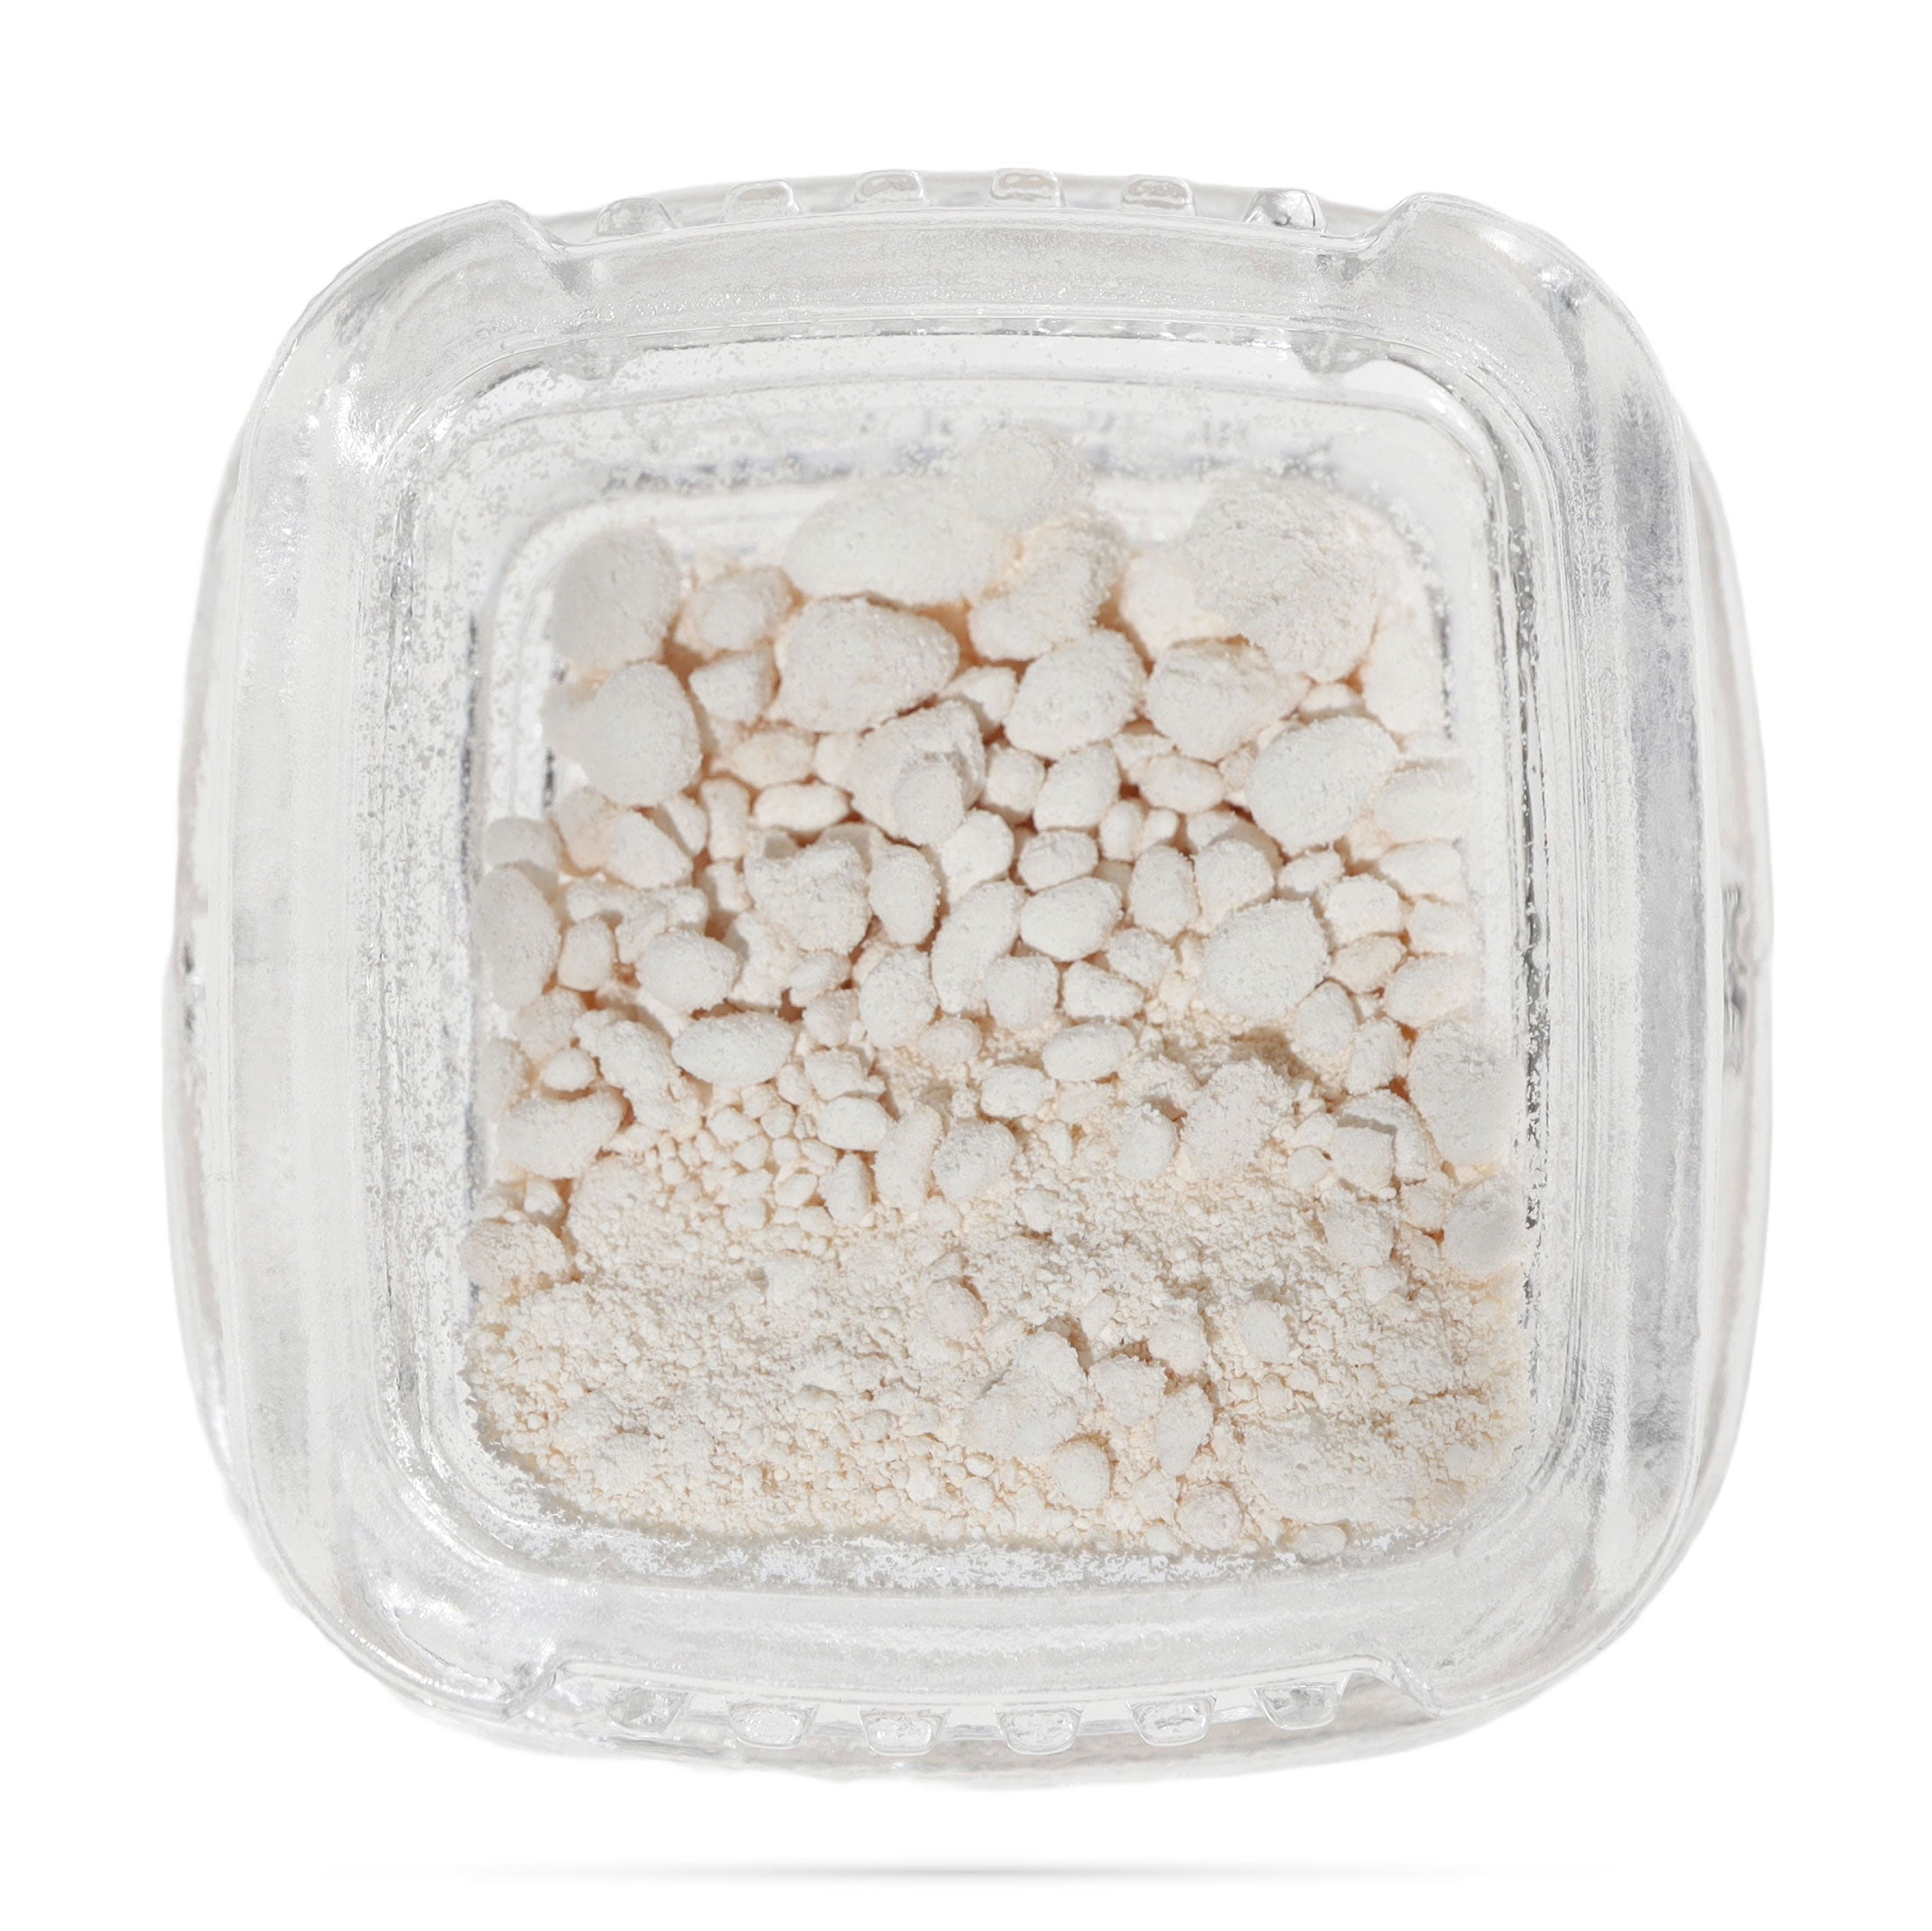 Image of a Calyx jar containing 1 gram of CBG Isolate.